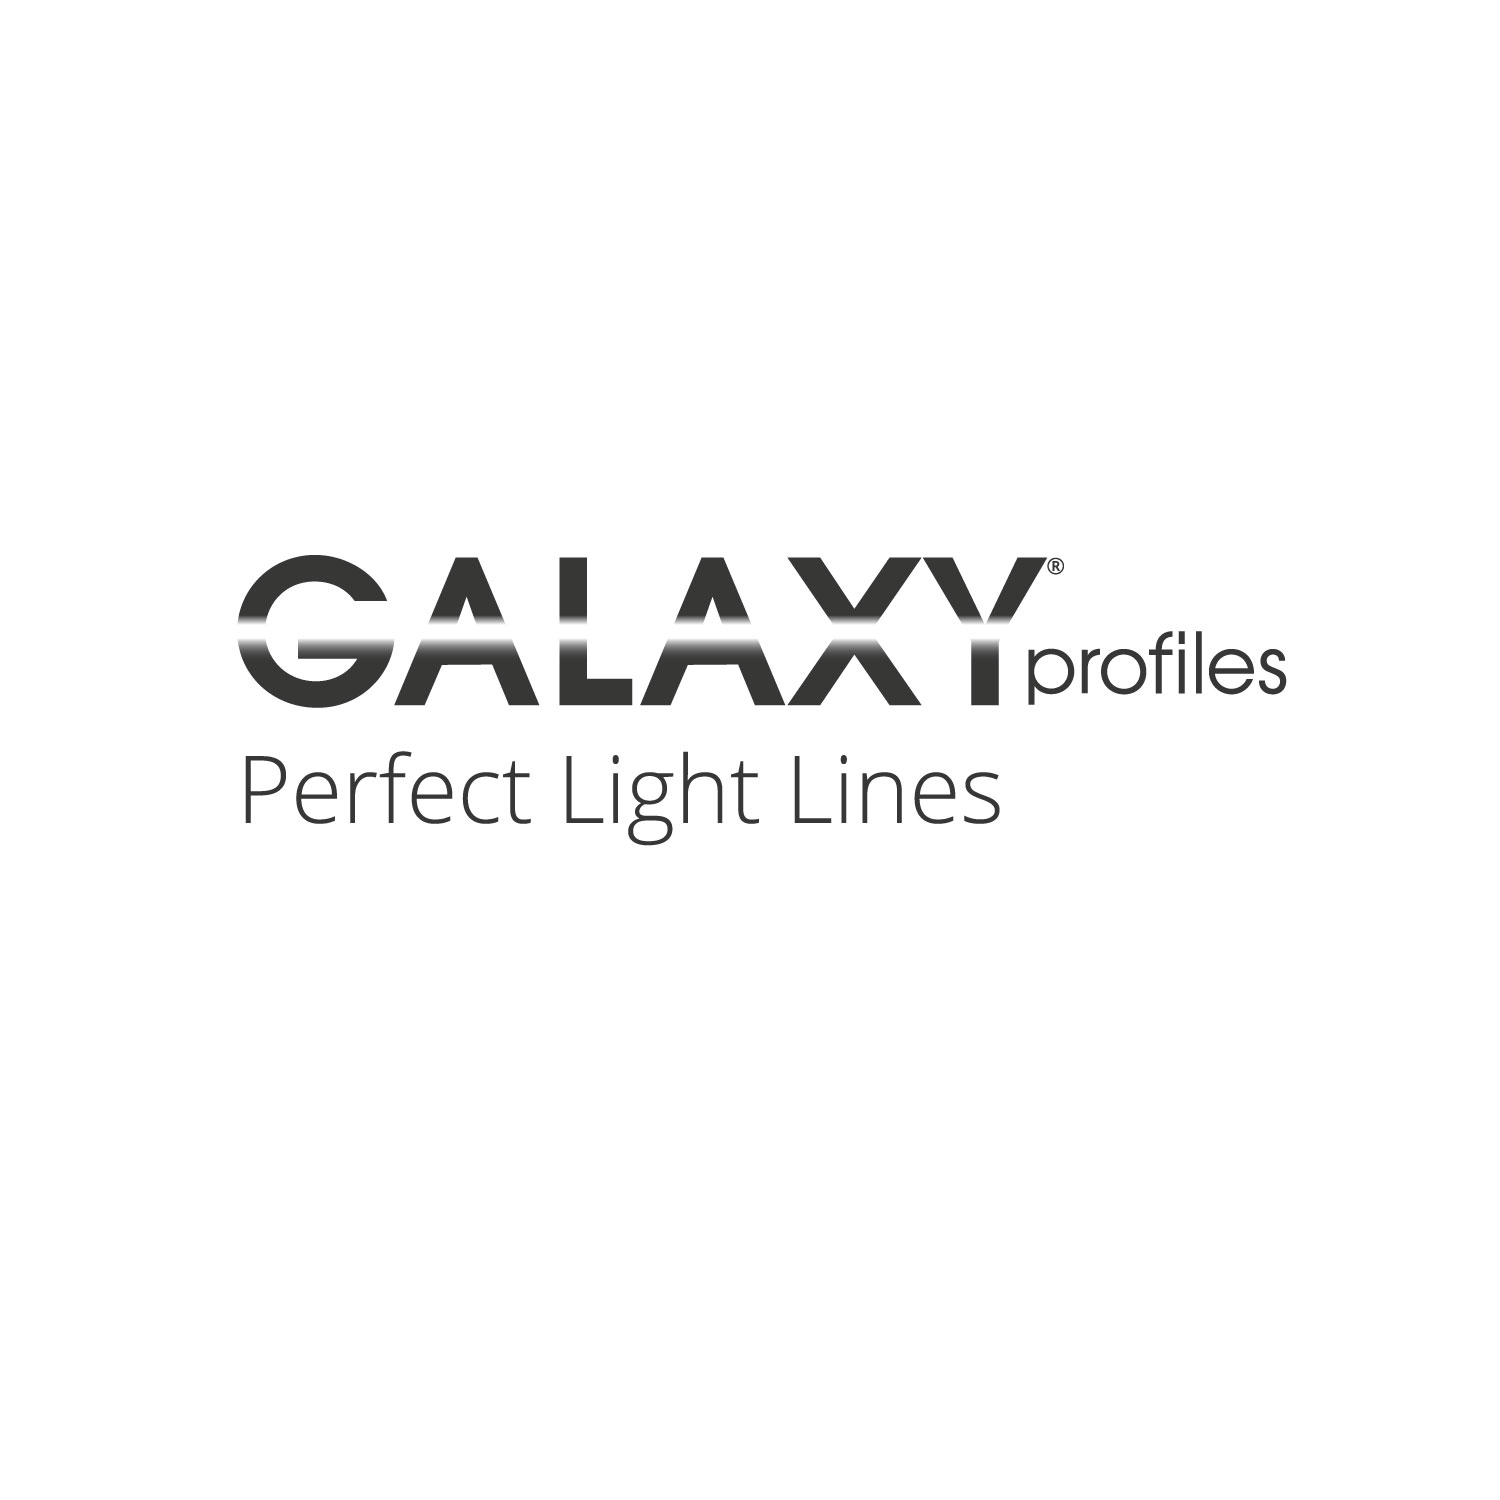 GALAXY® profiles - 2023 Musterbox bedruckte Cover